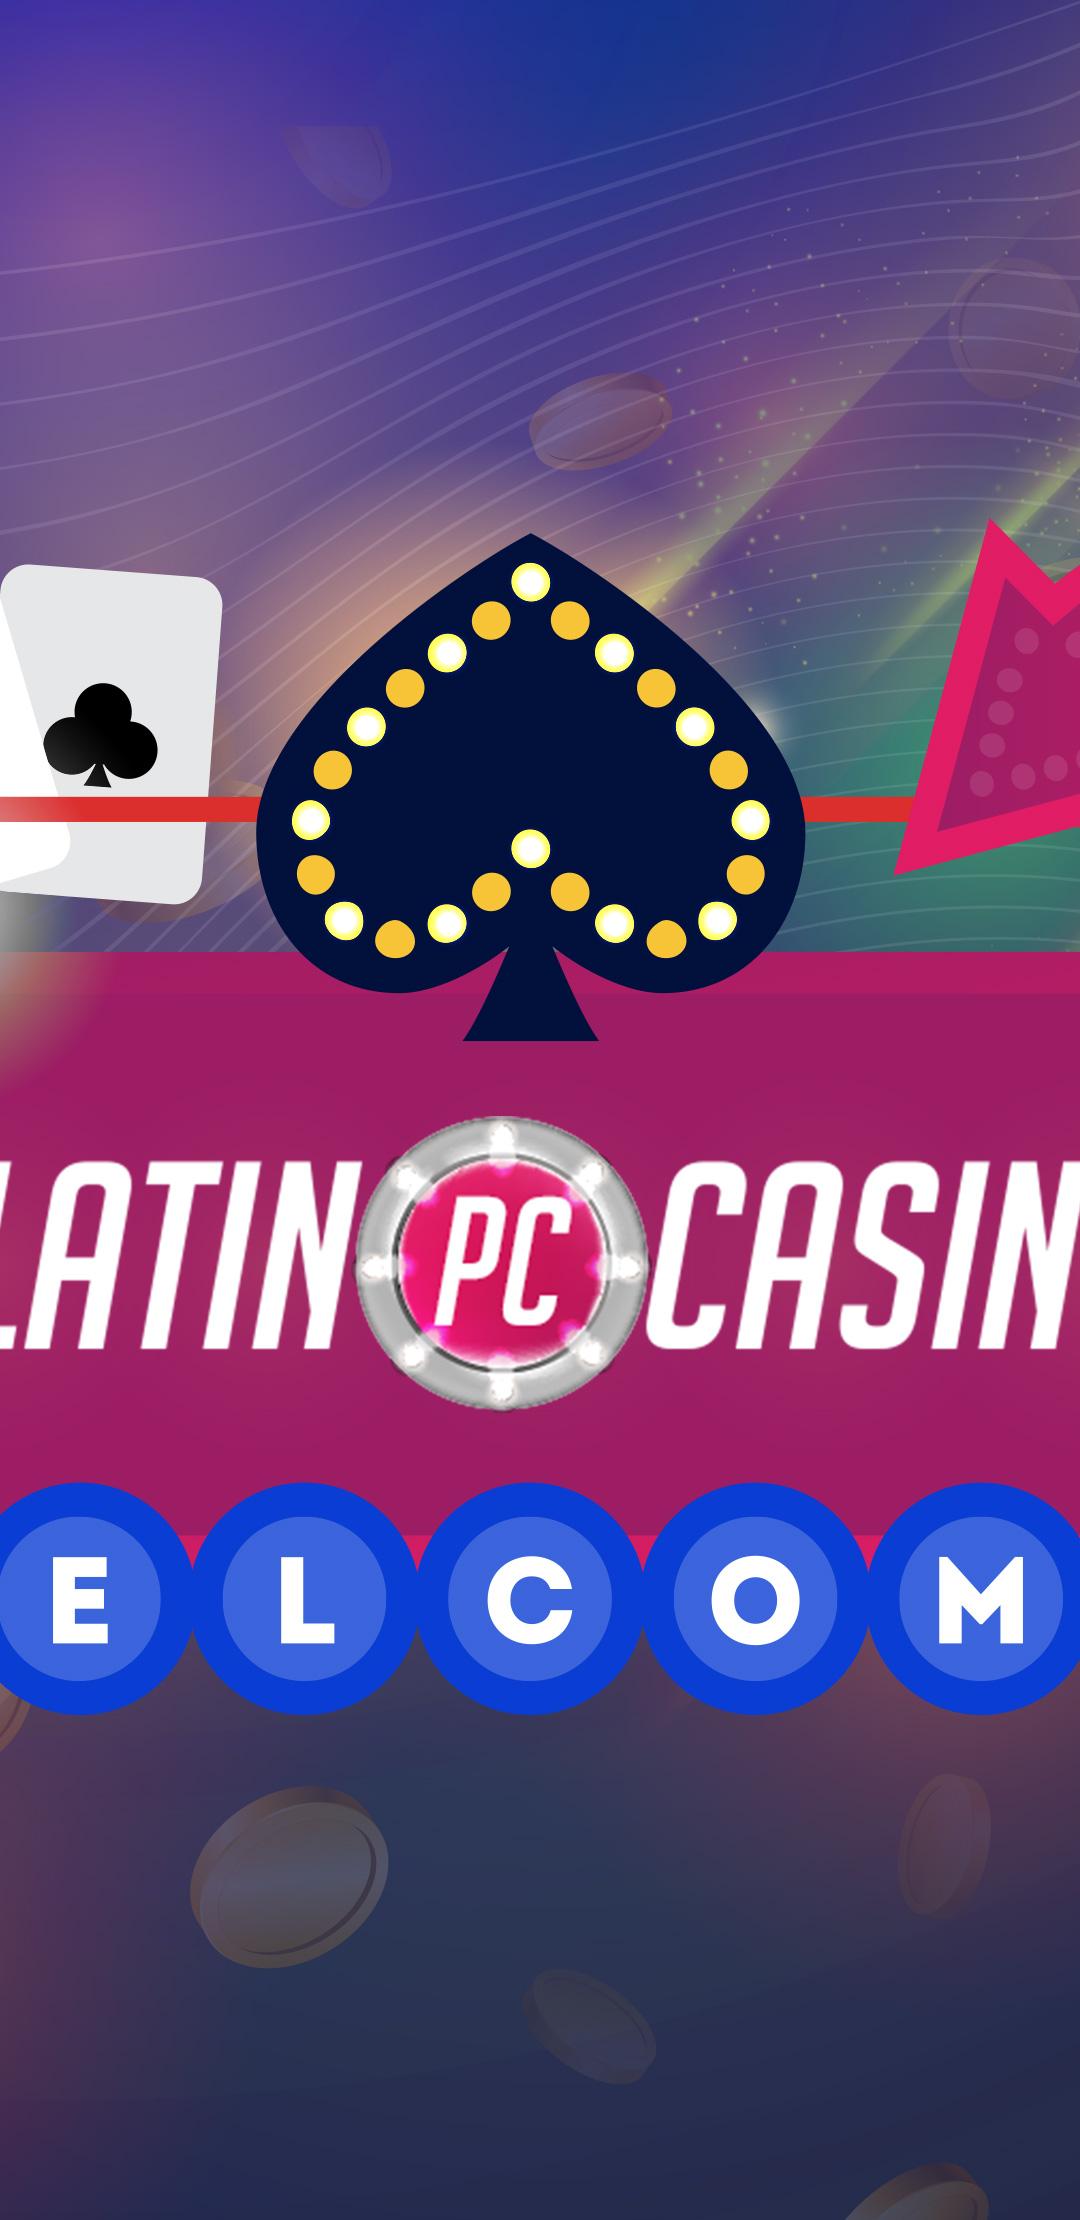 Platin Casino for Android - APK Download